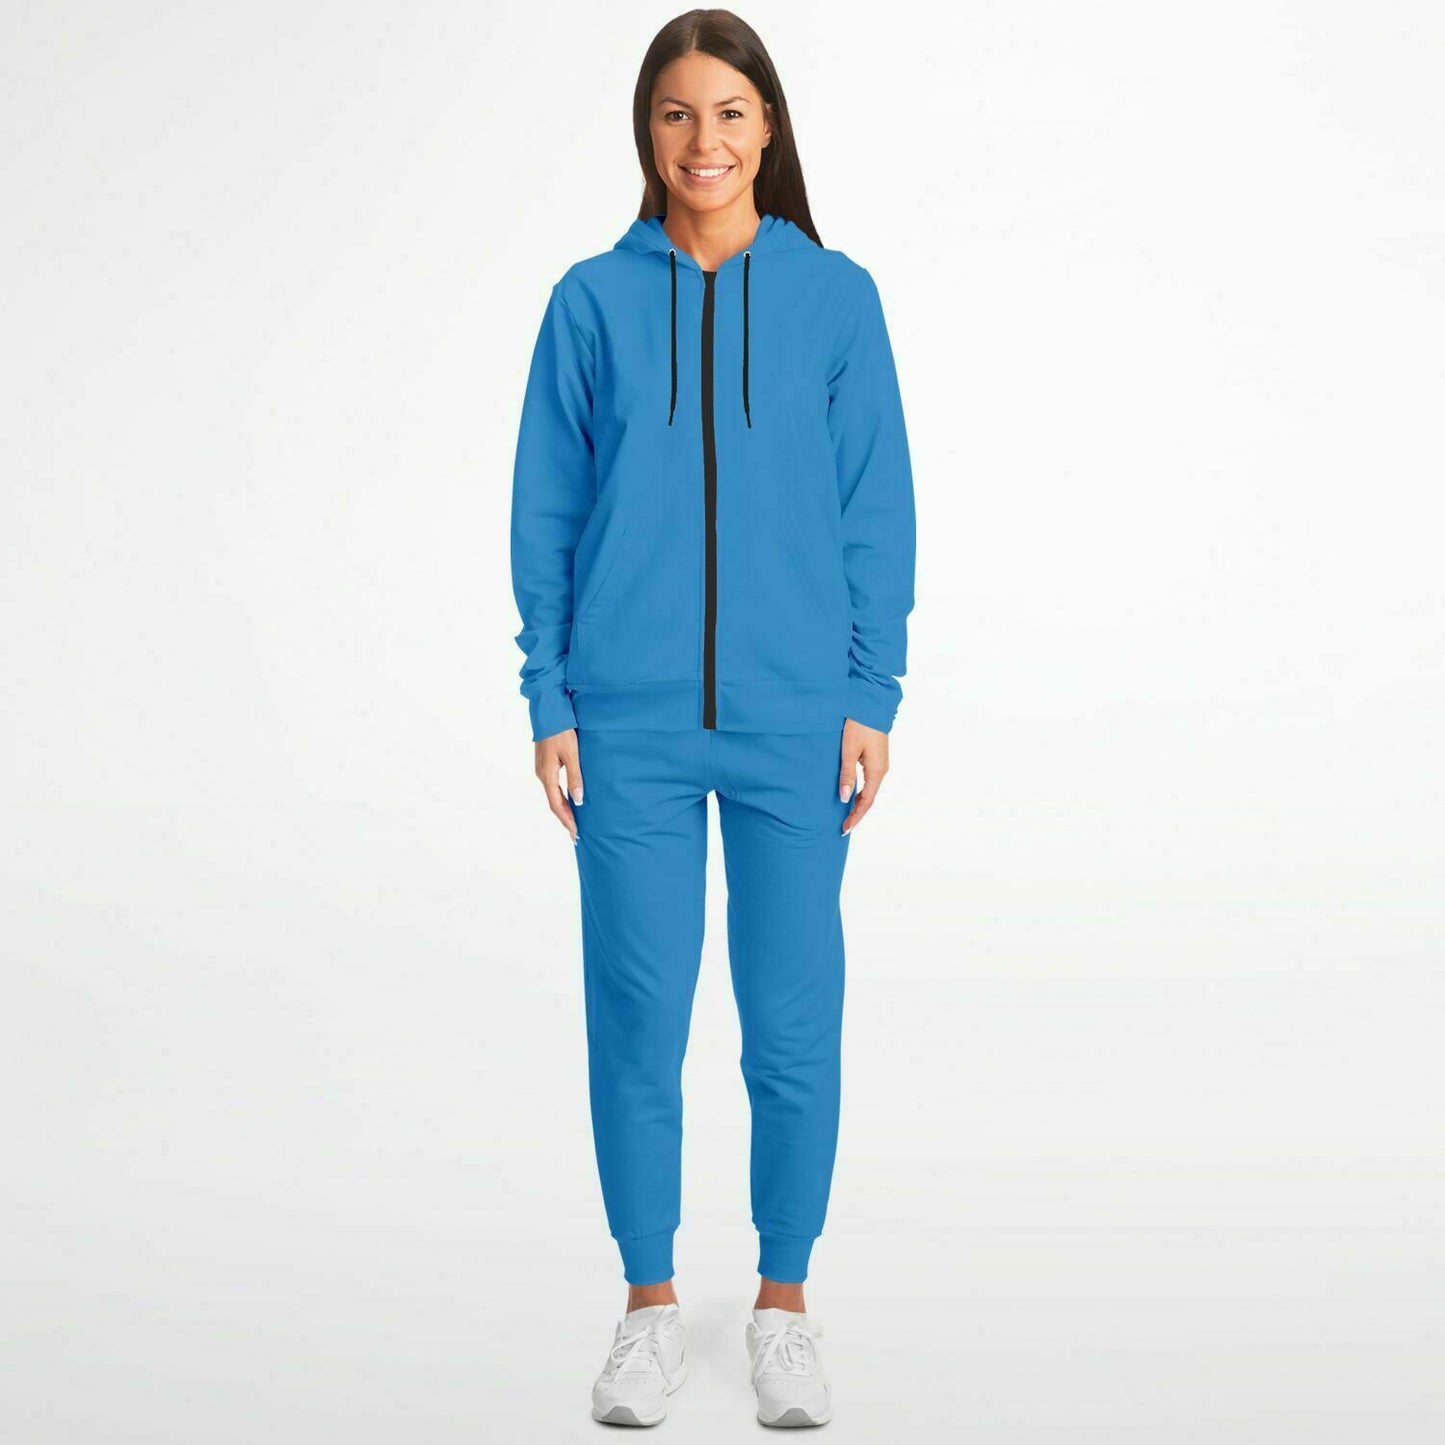 Nature Blue Zipper Hoodie and Jogger Set - Sport Finesse